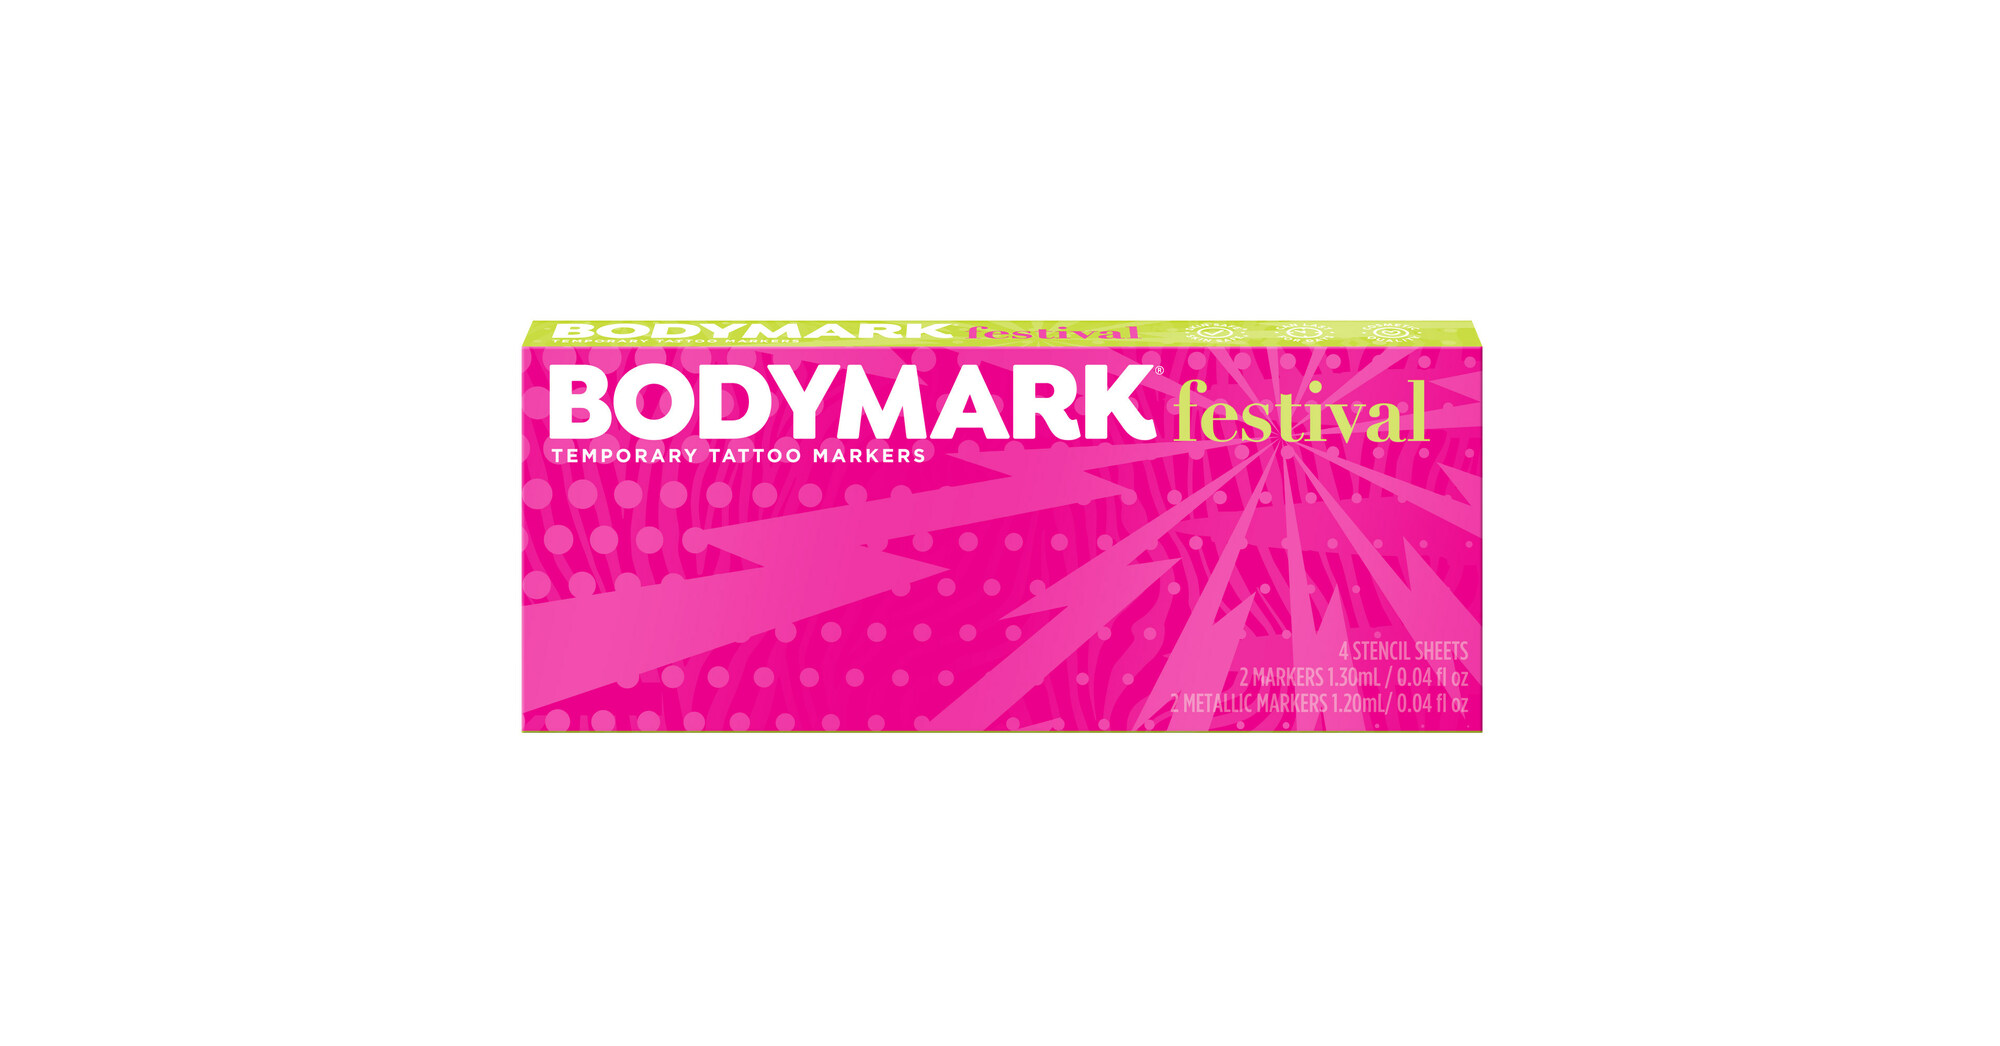 BODYMARK KICKS OFF FESTIVAL SEASON WITH NEW AMBASSADORS AND INNOVATIVE  PRODUCTS TO BE CONCERT-READY